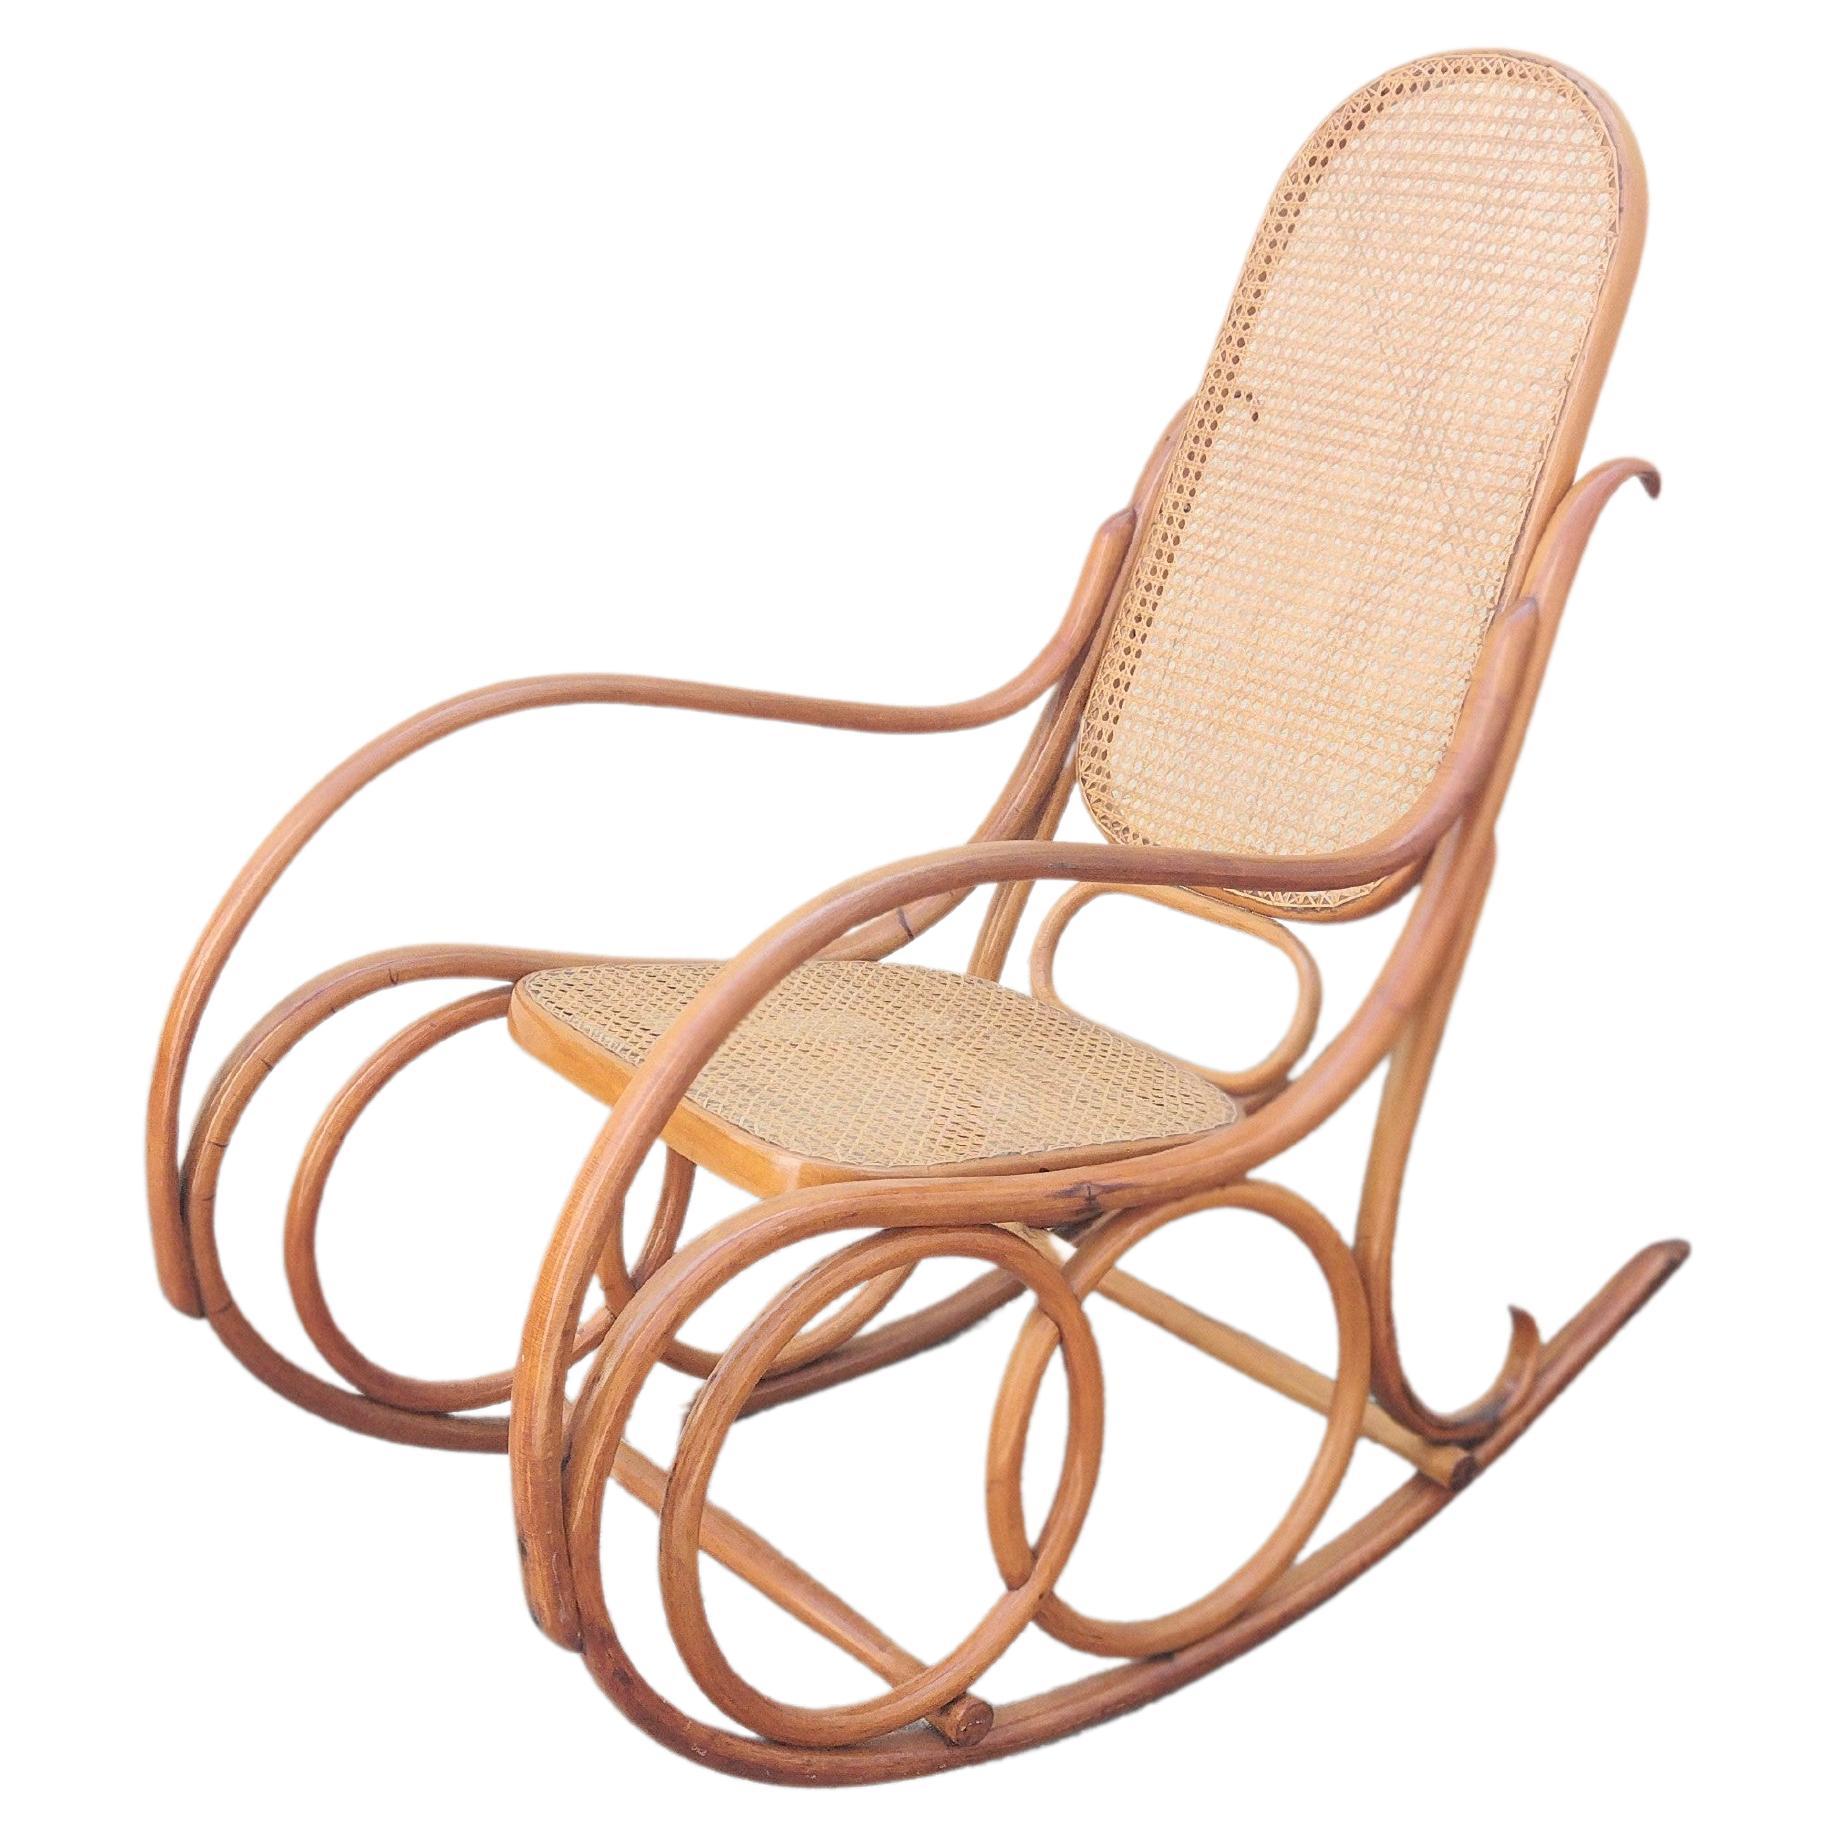 Brazilian Rocking Chair in Curved Wood and Indian Straw, 1960s For Sale